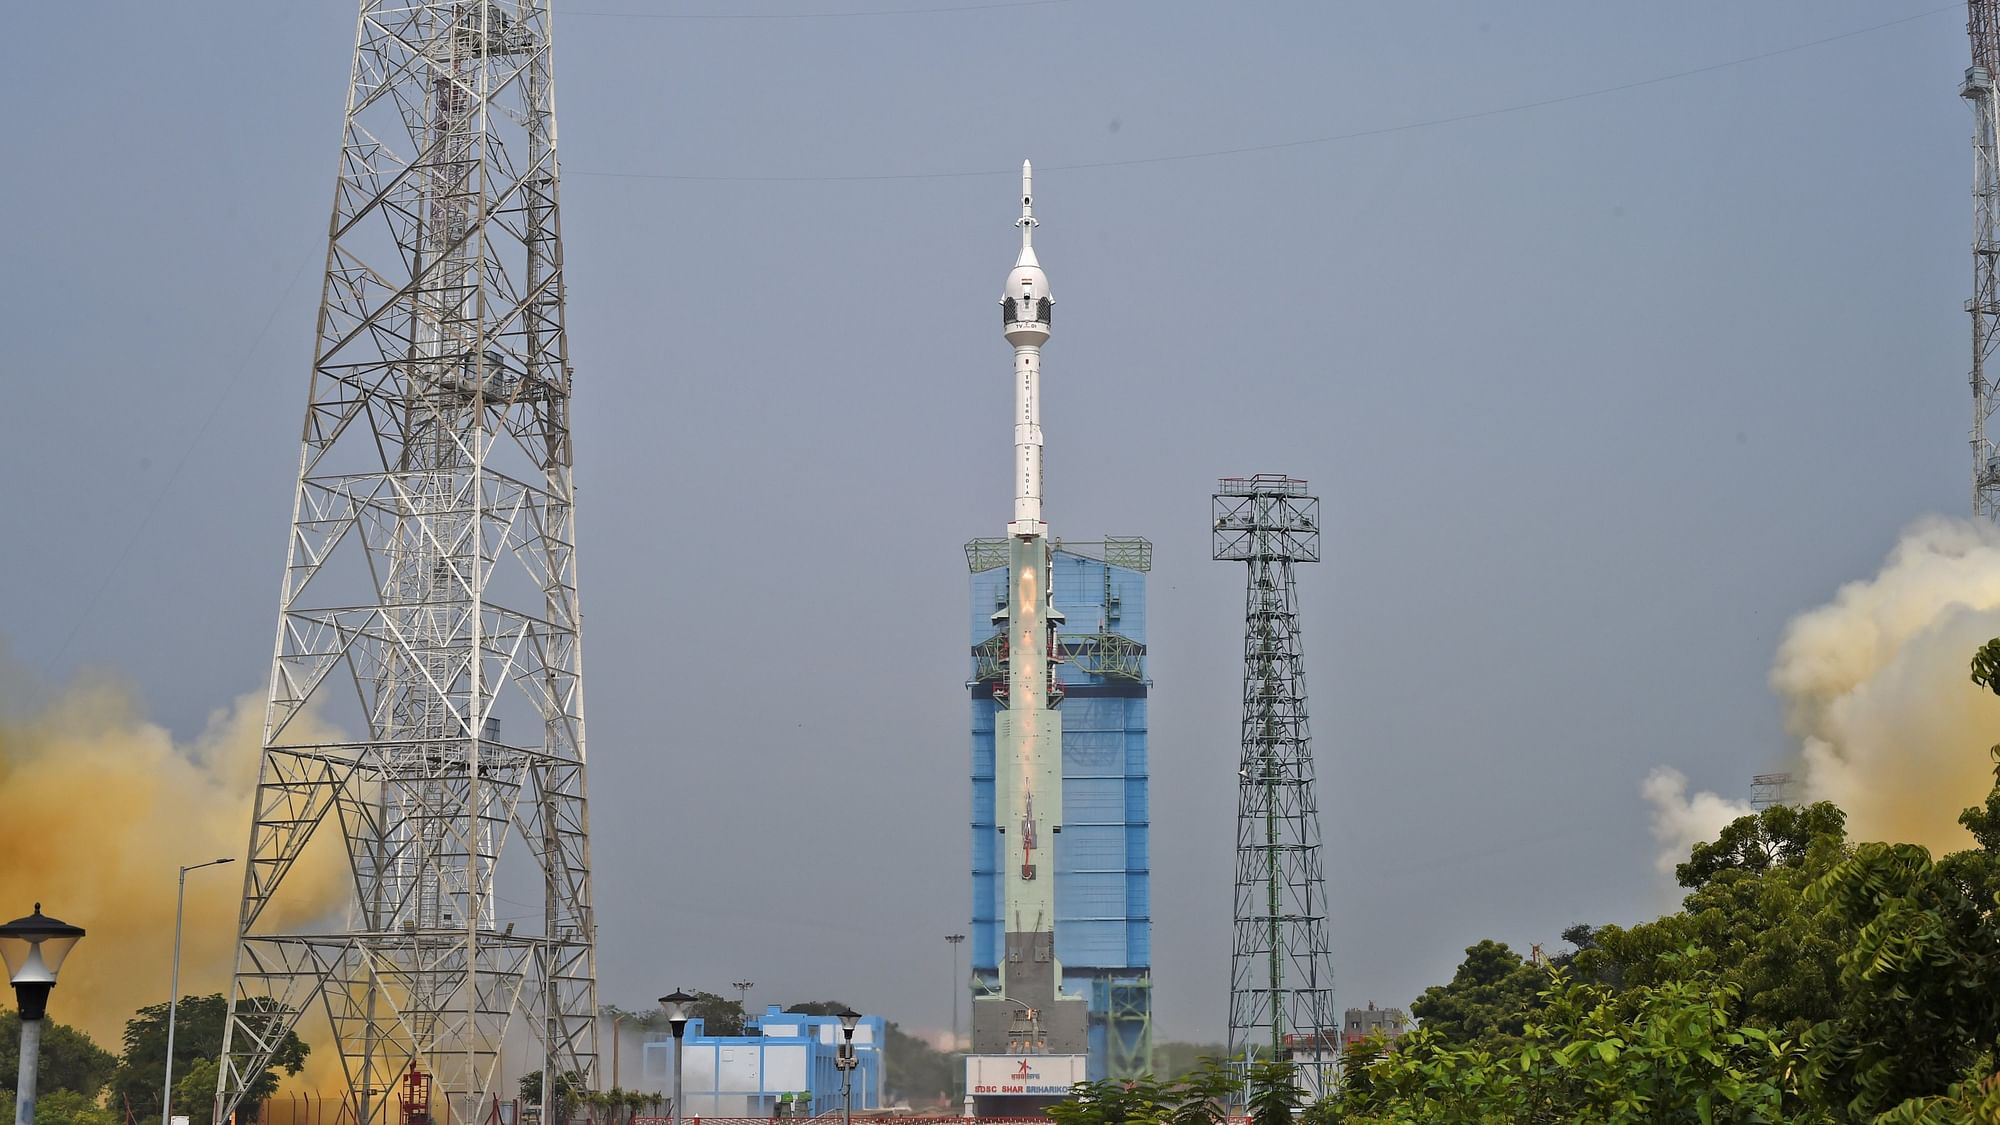 <div class="paragraphs"><p>The Indian Space Research Organisation (ISRO) launched the Flight Test Vehicle Abort Mission (TV-D1), which carried payloads to test the Gaganyaan mission's crew escape system, from Andhra Pradesh's Sriharikota, on Saturday, 21 October.</p></div>